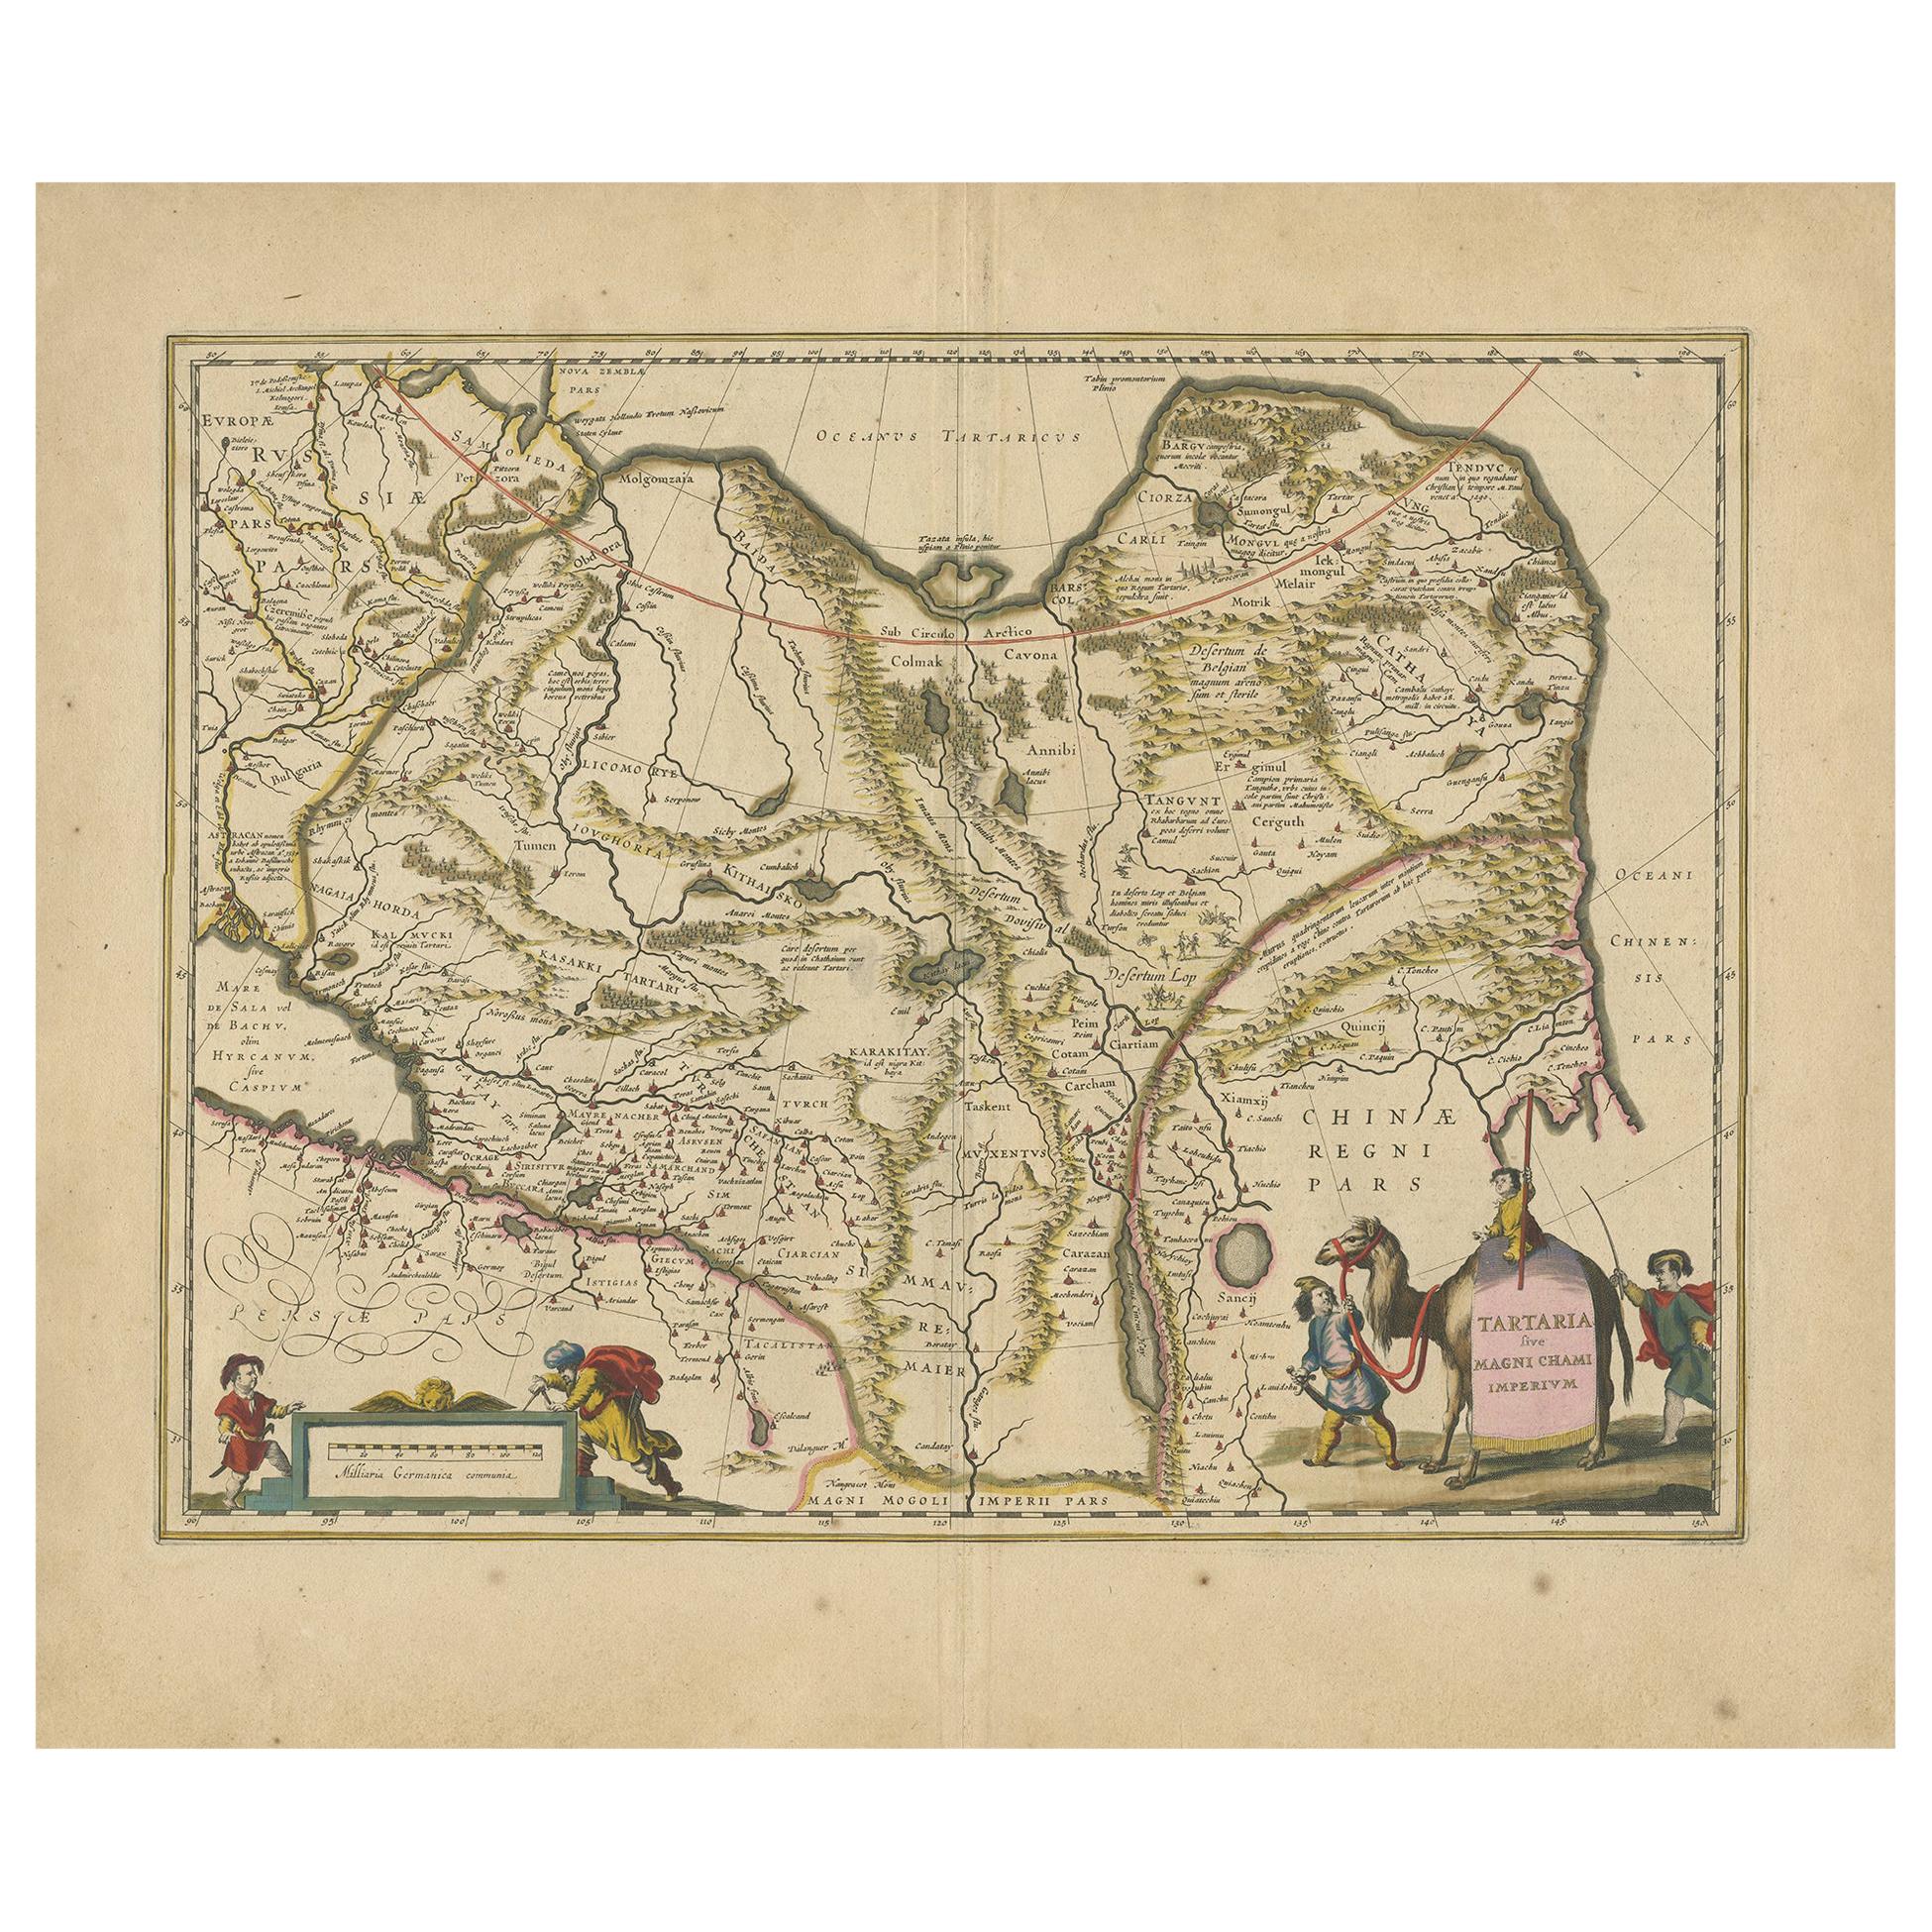 Antique Map of China, Tartary and Central Asia by Blaeu, circa 1645